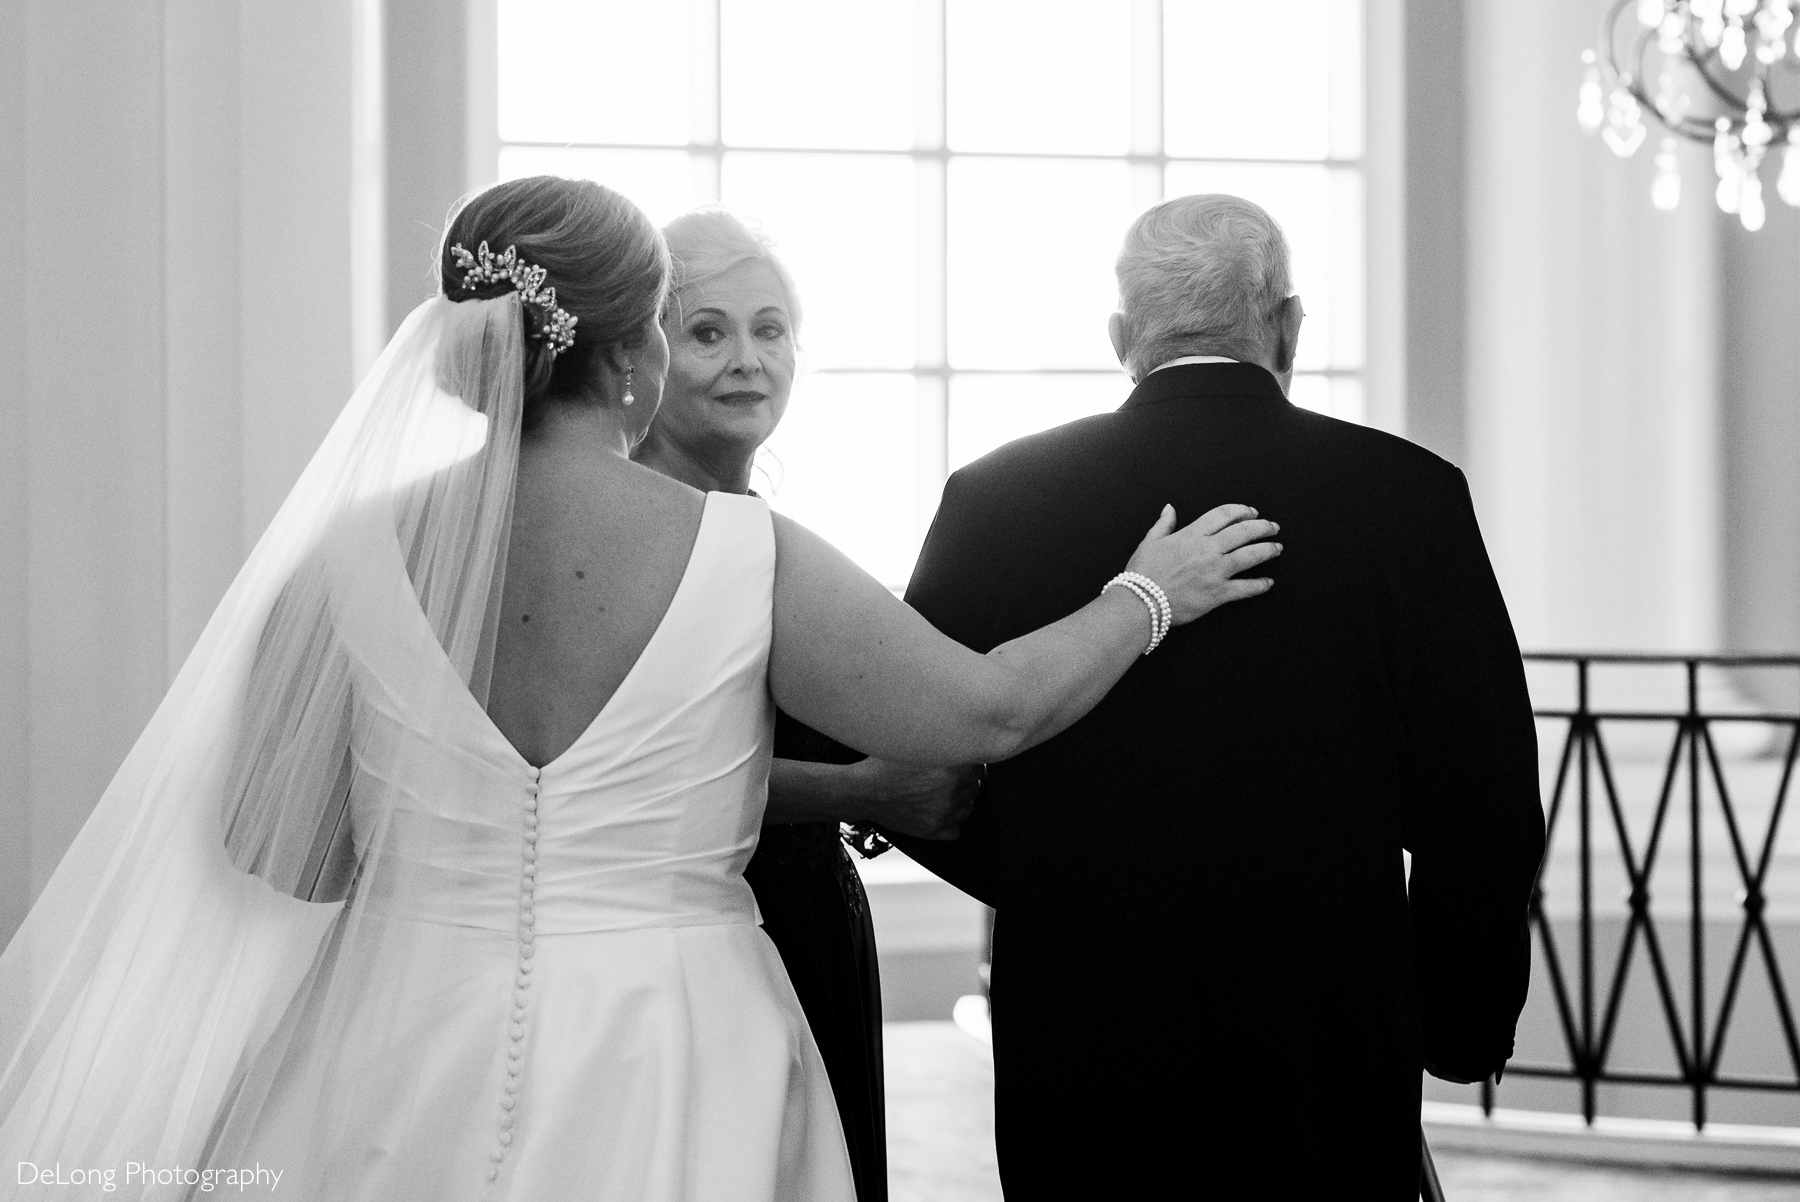 First look with bride's parents at the Ballantyne Hotel by Charlotte Wedding Photographers DeLong Photography